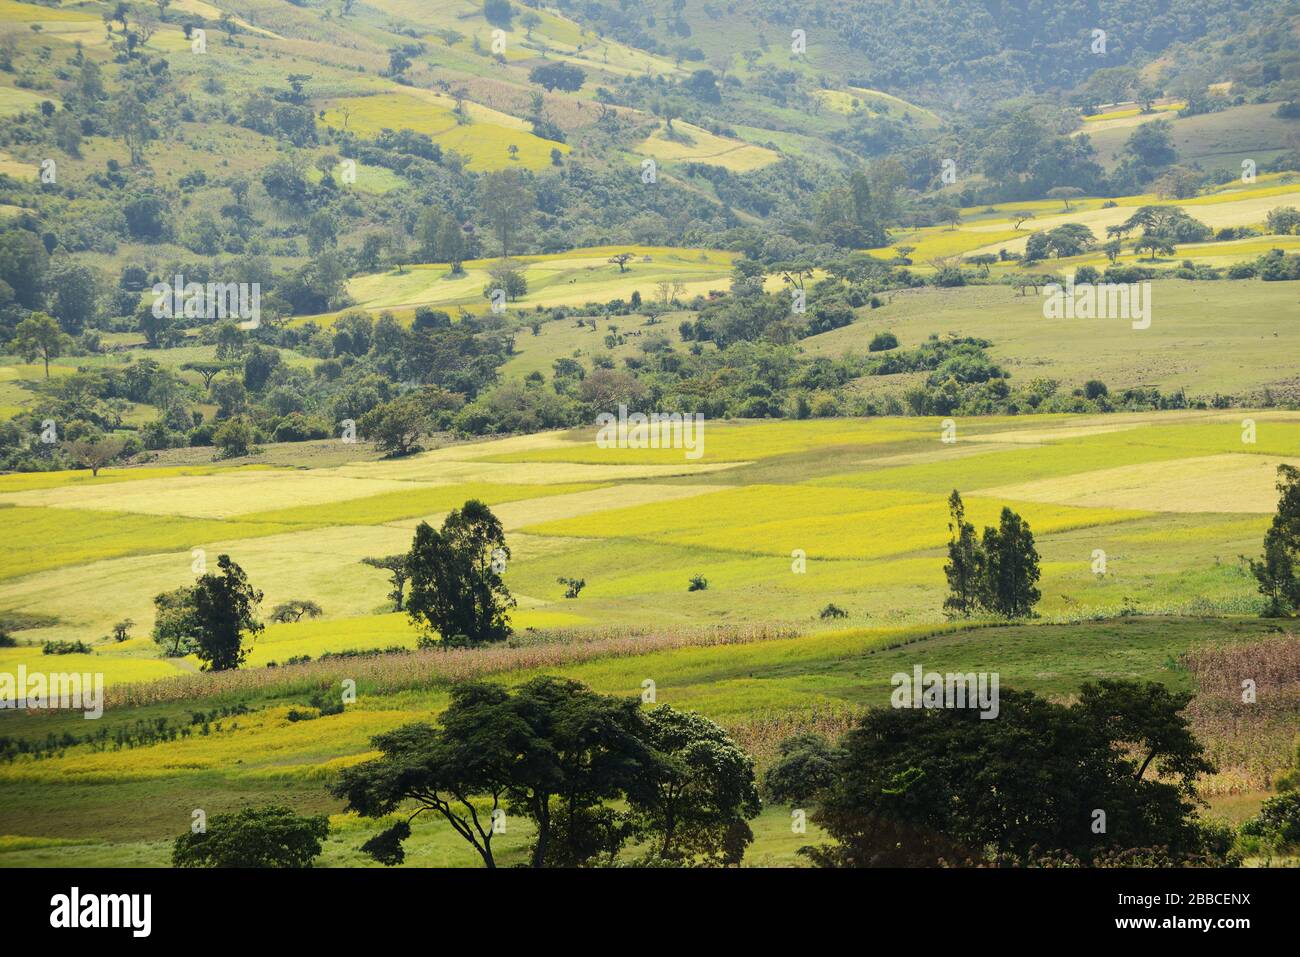 Agruculture landscapes in Ethiopia's Southwest. Stock Photo